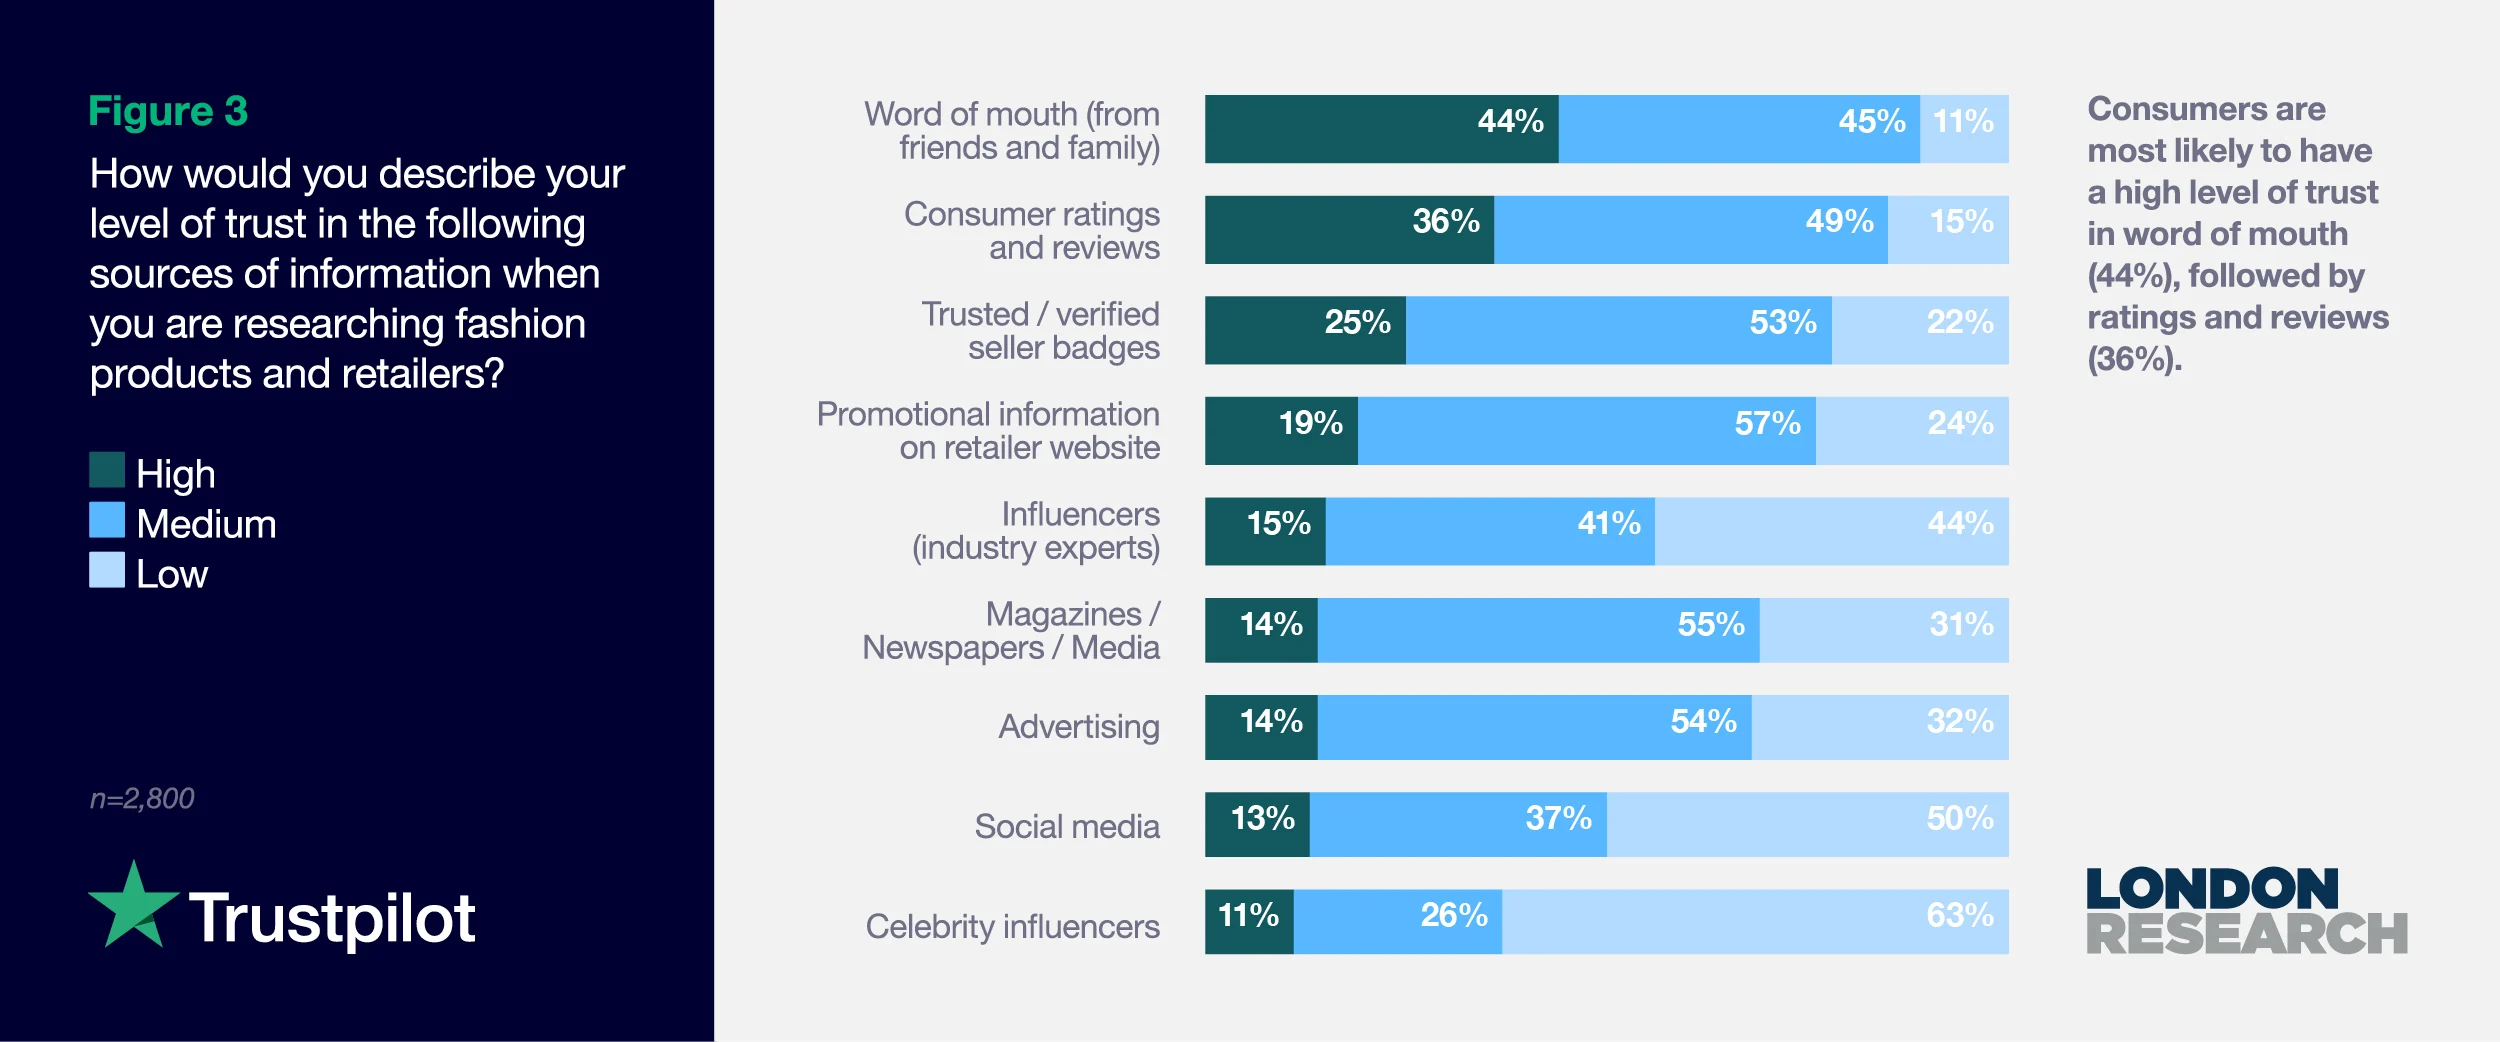 Figure 3: How would you describe your level of trust in the following sources of information when you are researching fashion products and retailers?